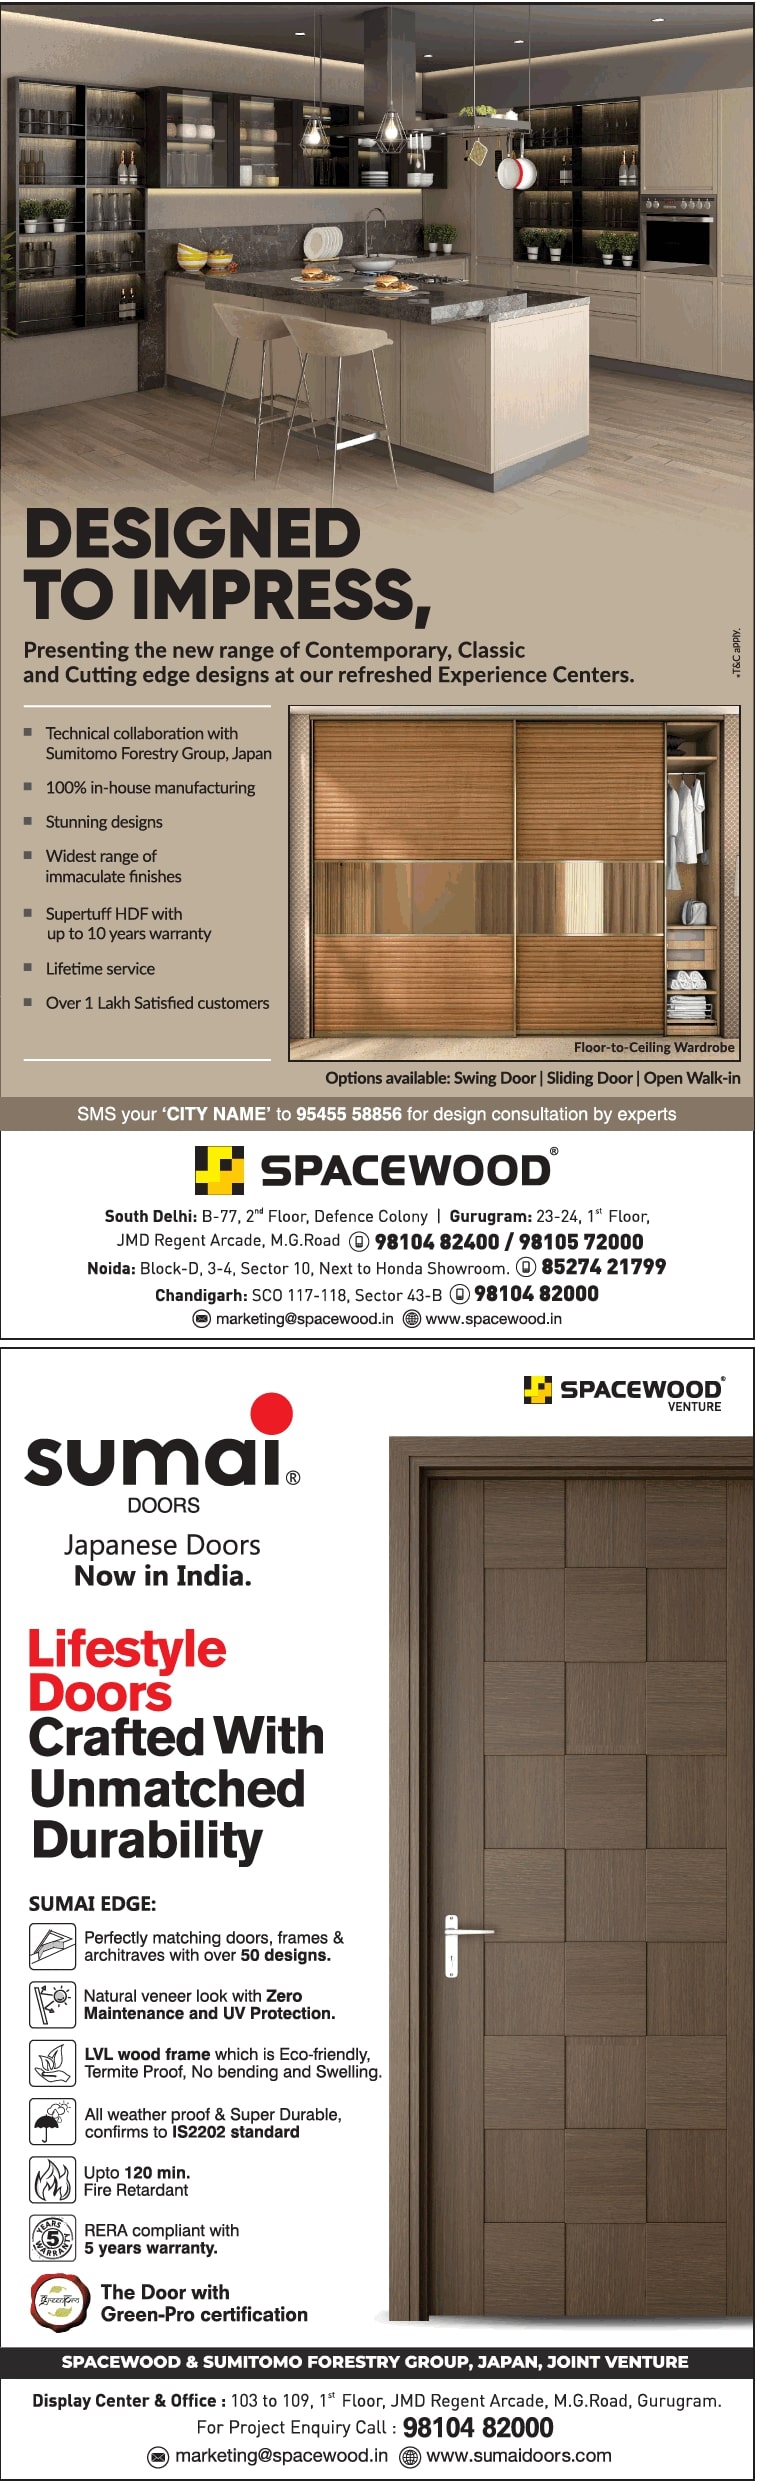 spacewood-lifestyle-doors-crafted-with-unmatched-durability-ad-times-of-india-delhi-20-03-2021